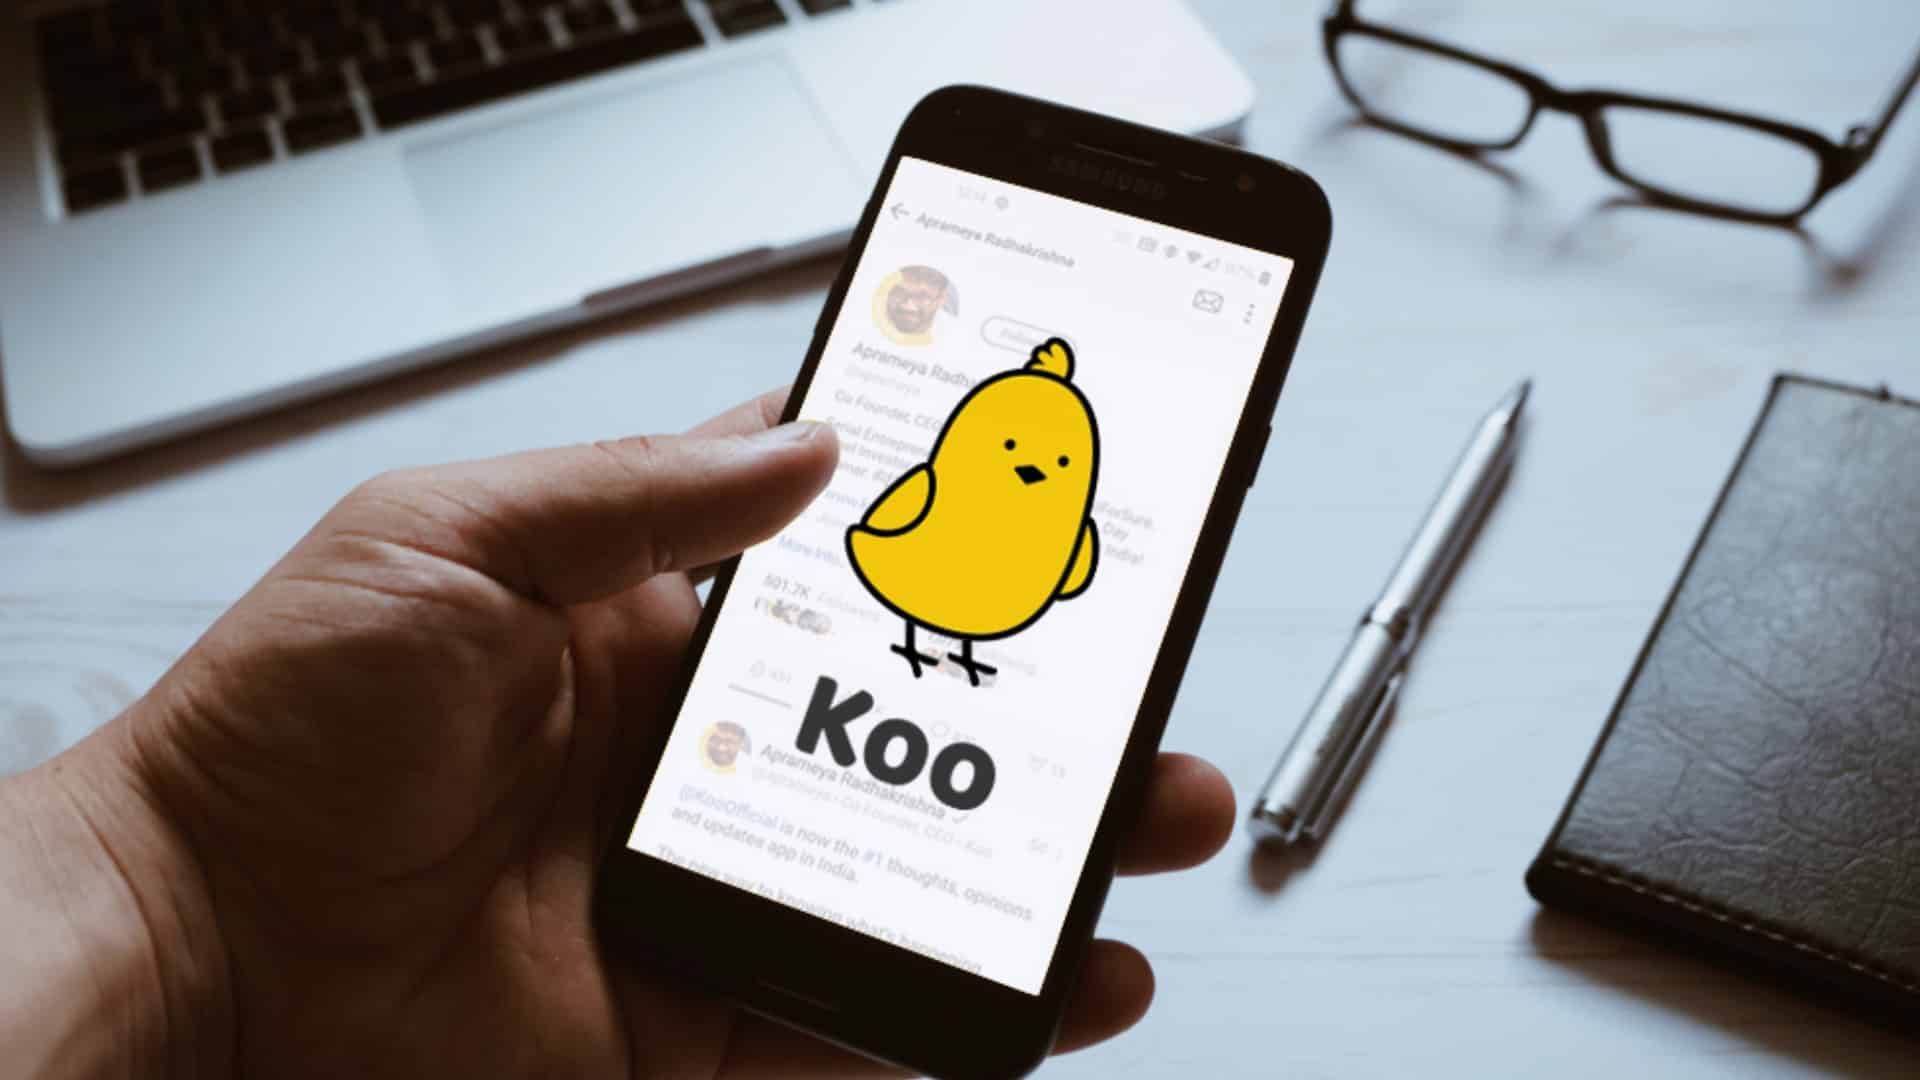 Twitter responsible for creating bots, Koo won't charge money for verification: CEO